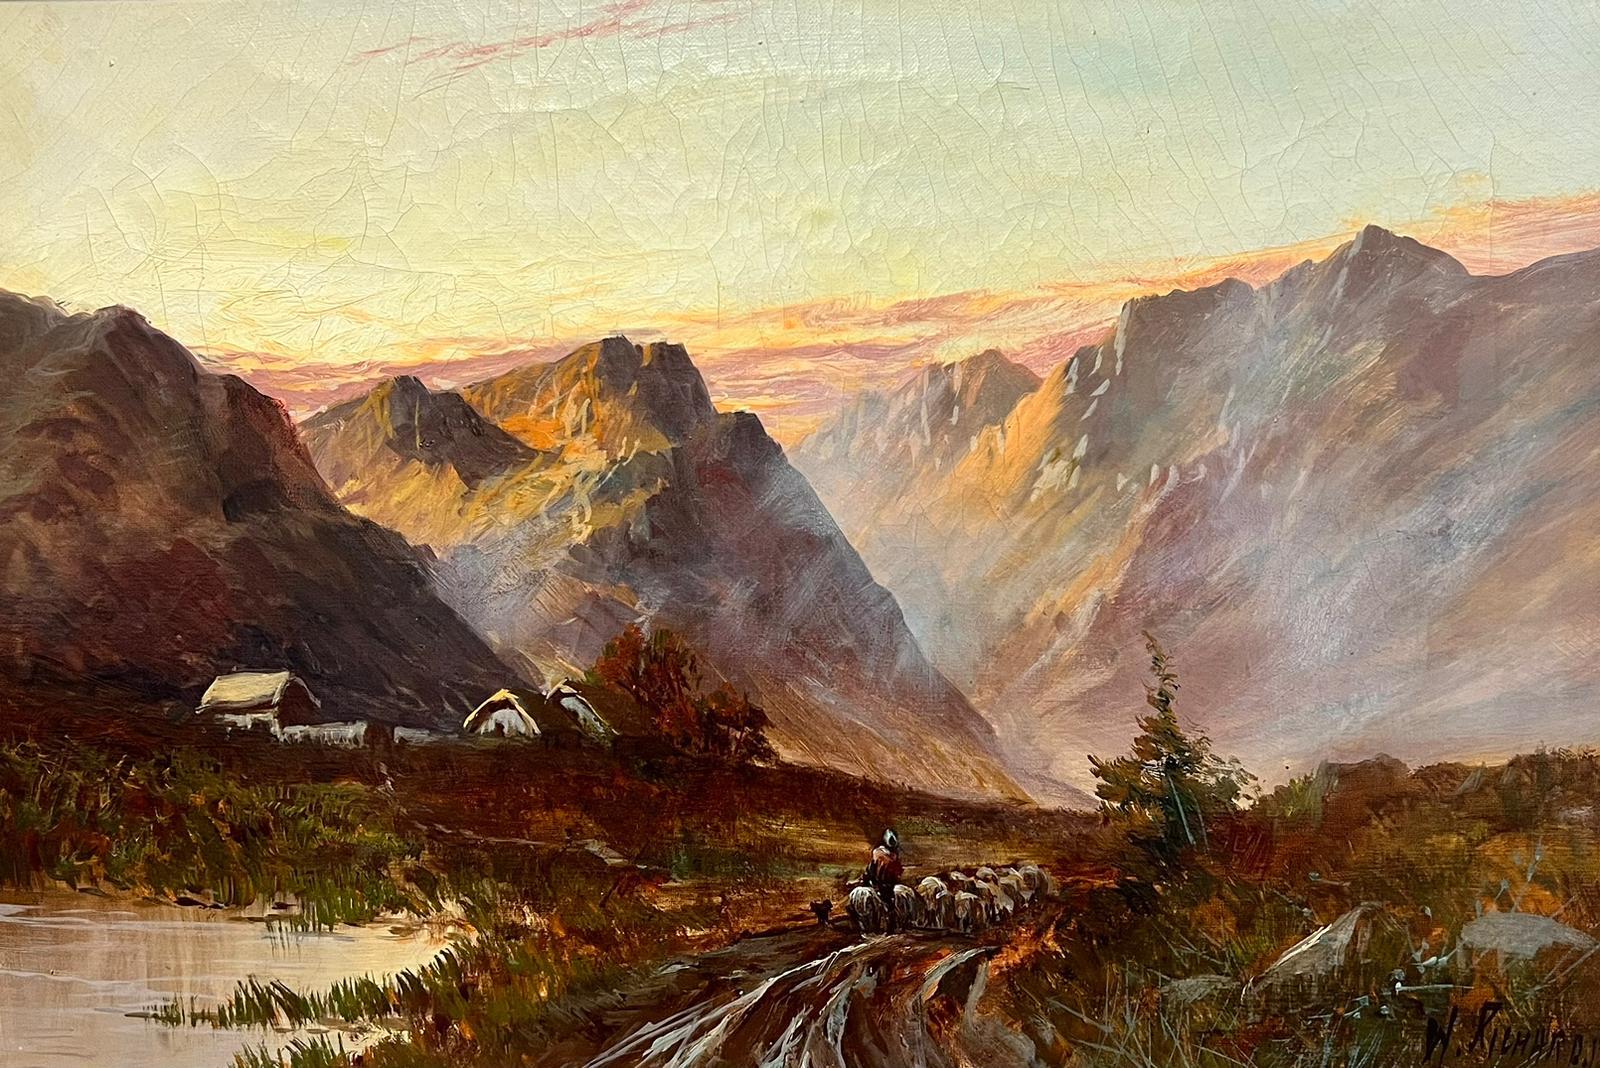 Francis E. Jamieson Landscape Painting - Antique Scottish Highlands Oil Sheep in Sunset Dramatic Scotland Glen Valley